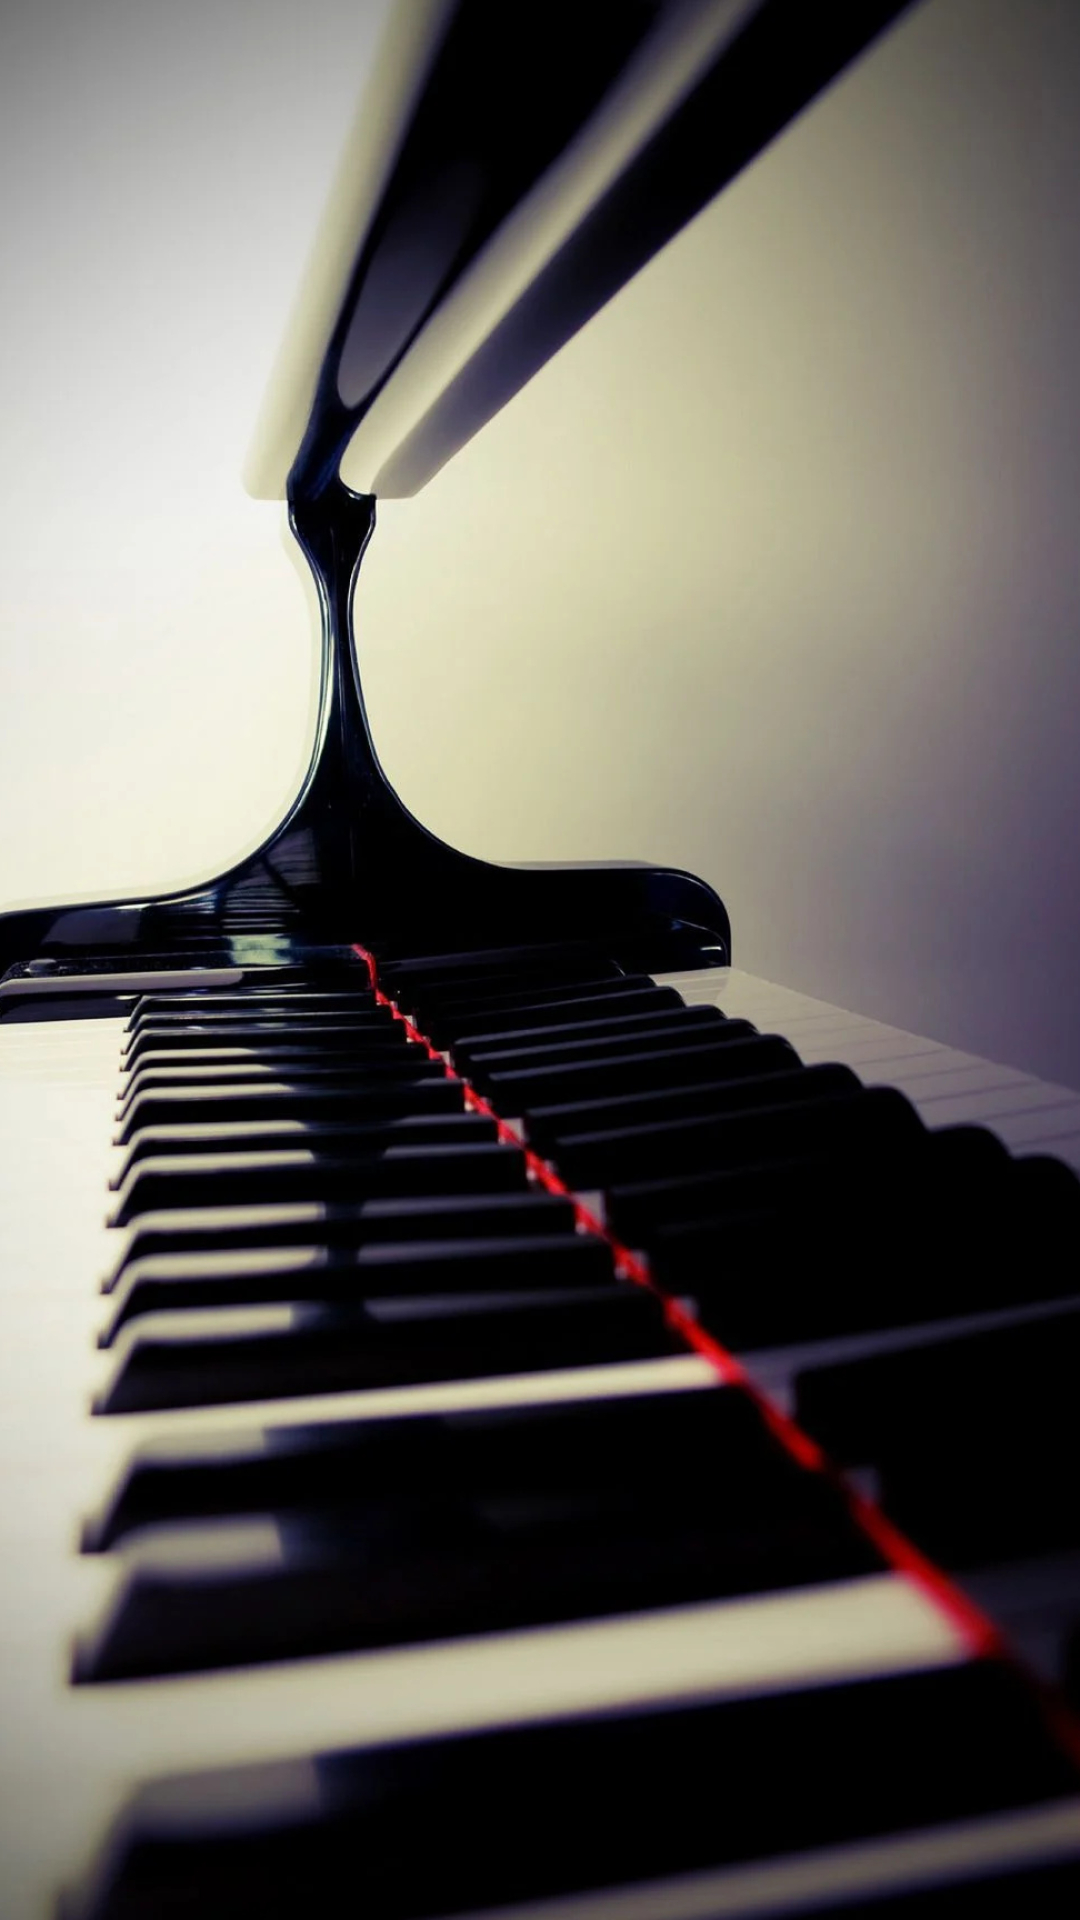 Fortepiano: Keyboard Close-Up, Black And White, Classical Music. 1080x1920 Full HD Wallpaper.